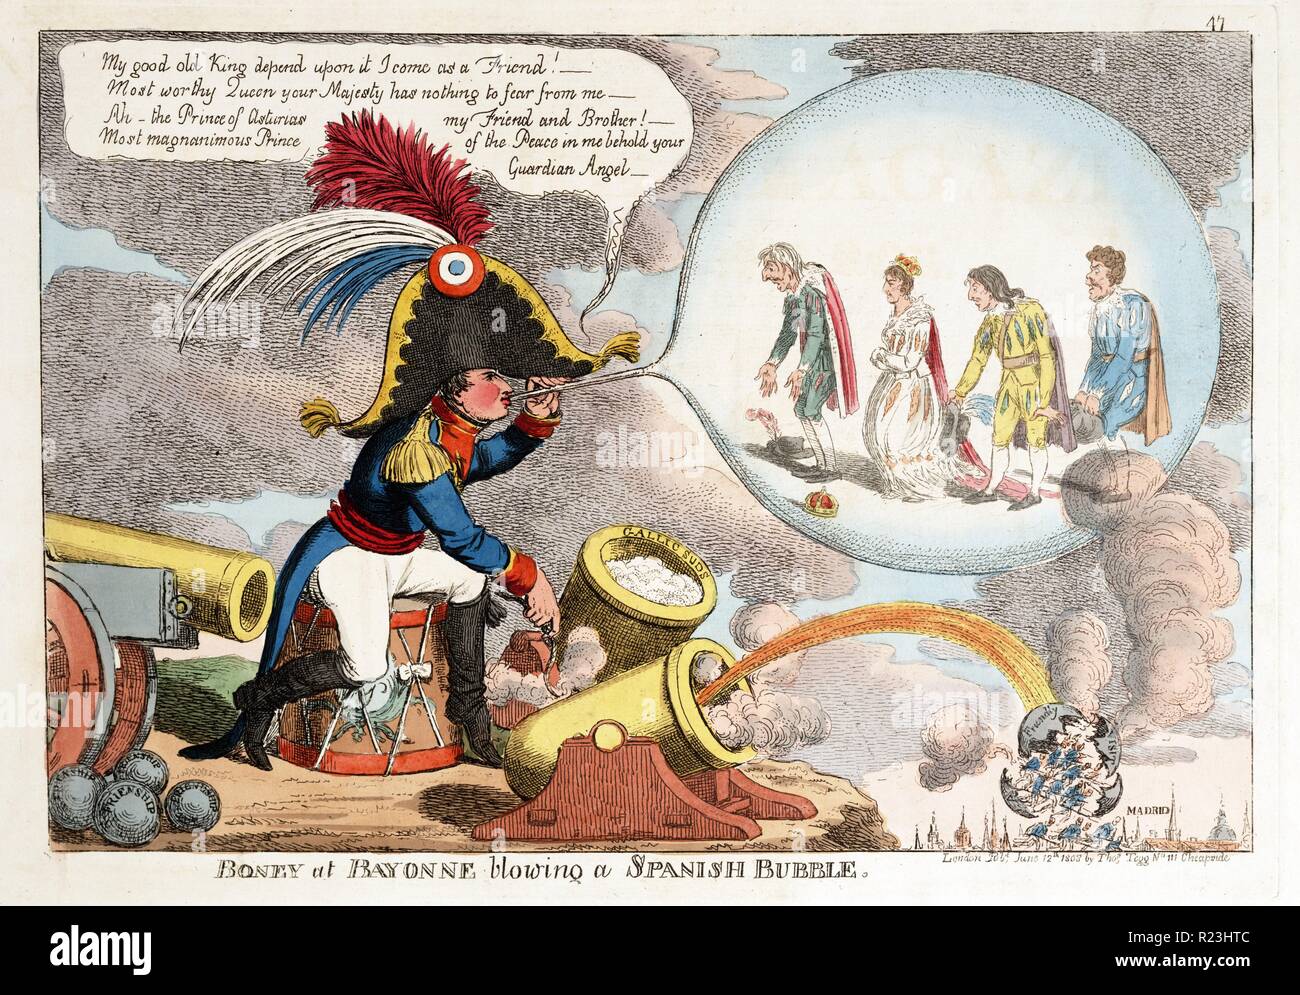 Boney at Bayonne blowing a Spanish bubble. Print shows Napoleon convincing the Spanish royalty, who are enclosed in a bubble, of his friendship as he fires a cannonball at Madrid. 1808 Stock Photo